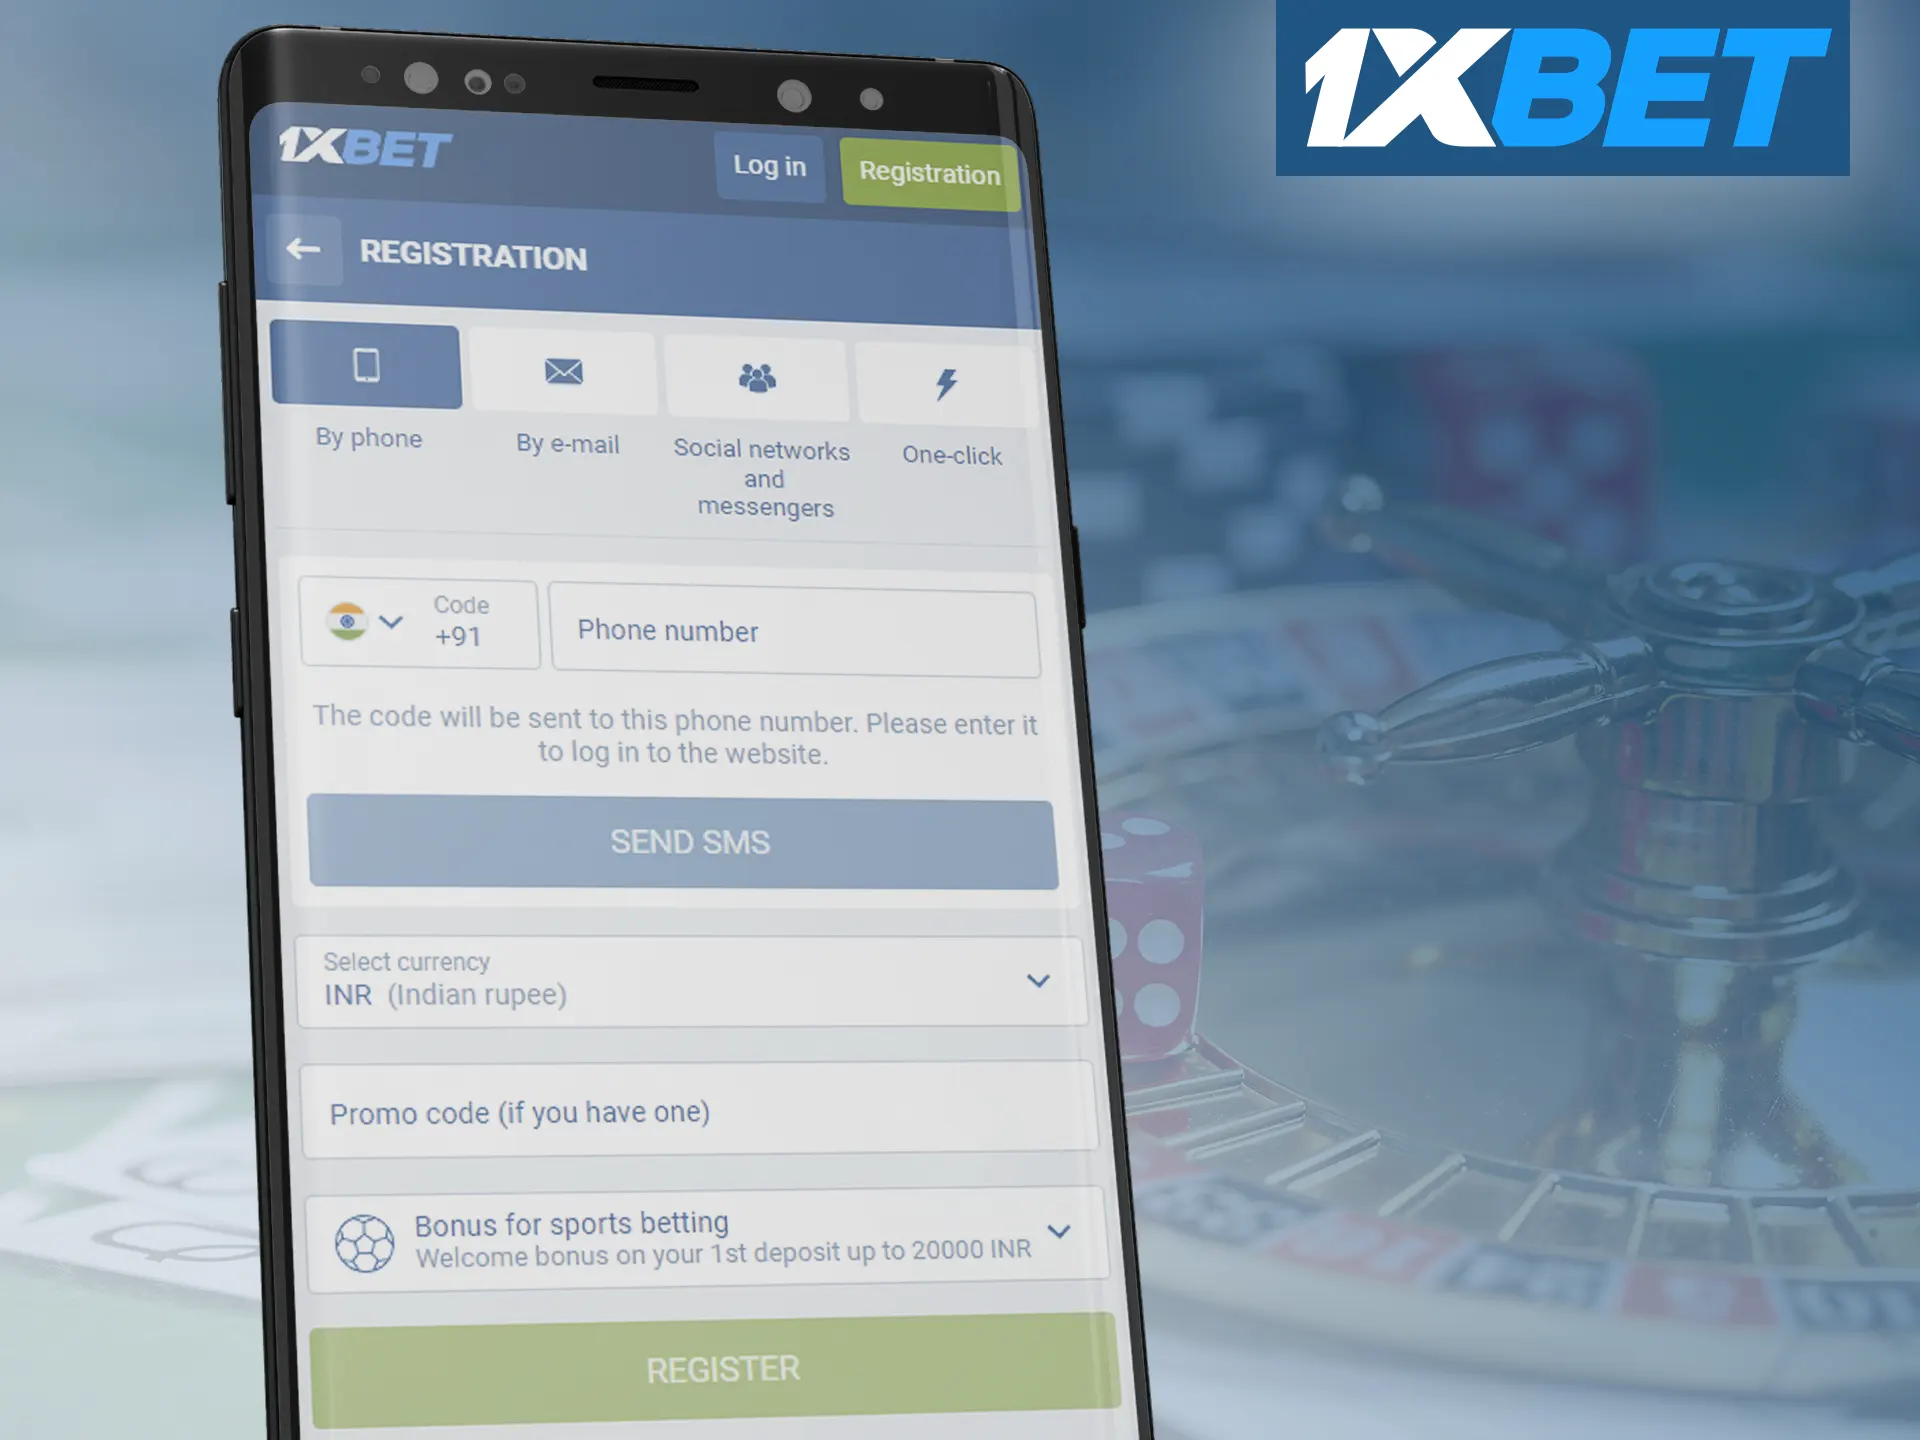 Sign up for the 1xbet mobile app.